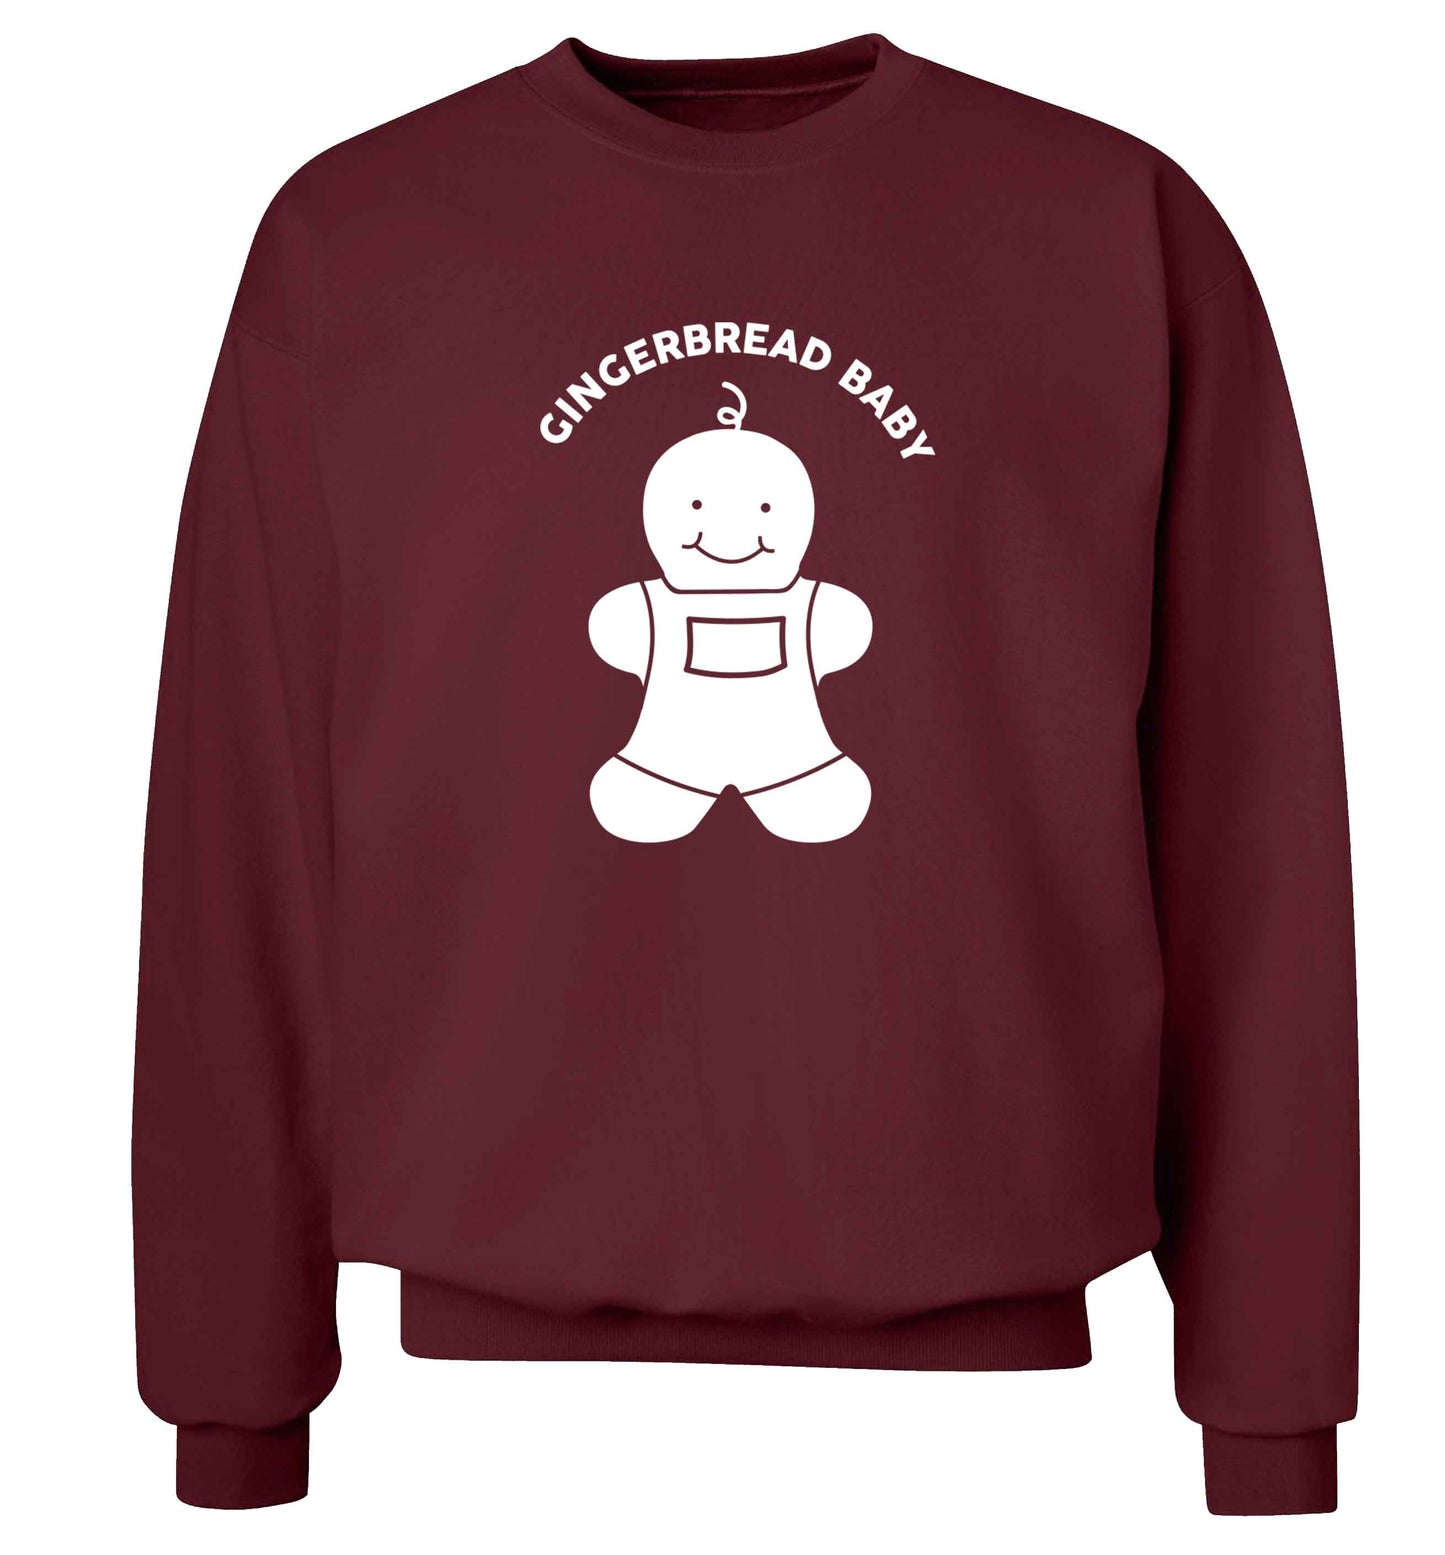 Gingerbread baby adult's unisex maroon sweater 2XL